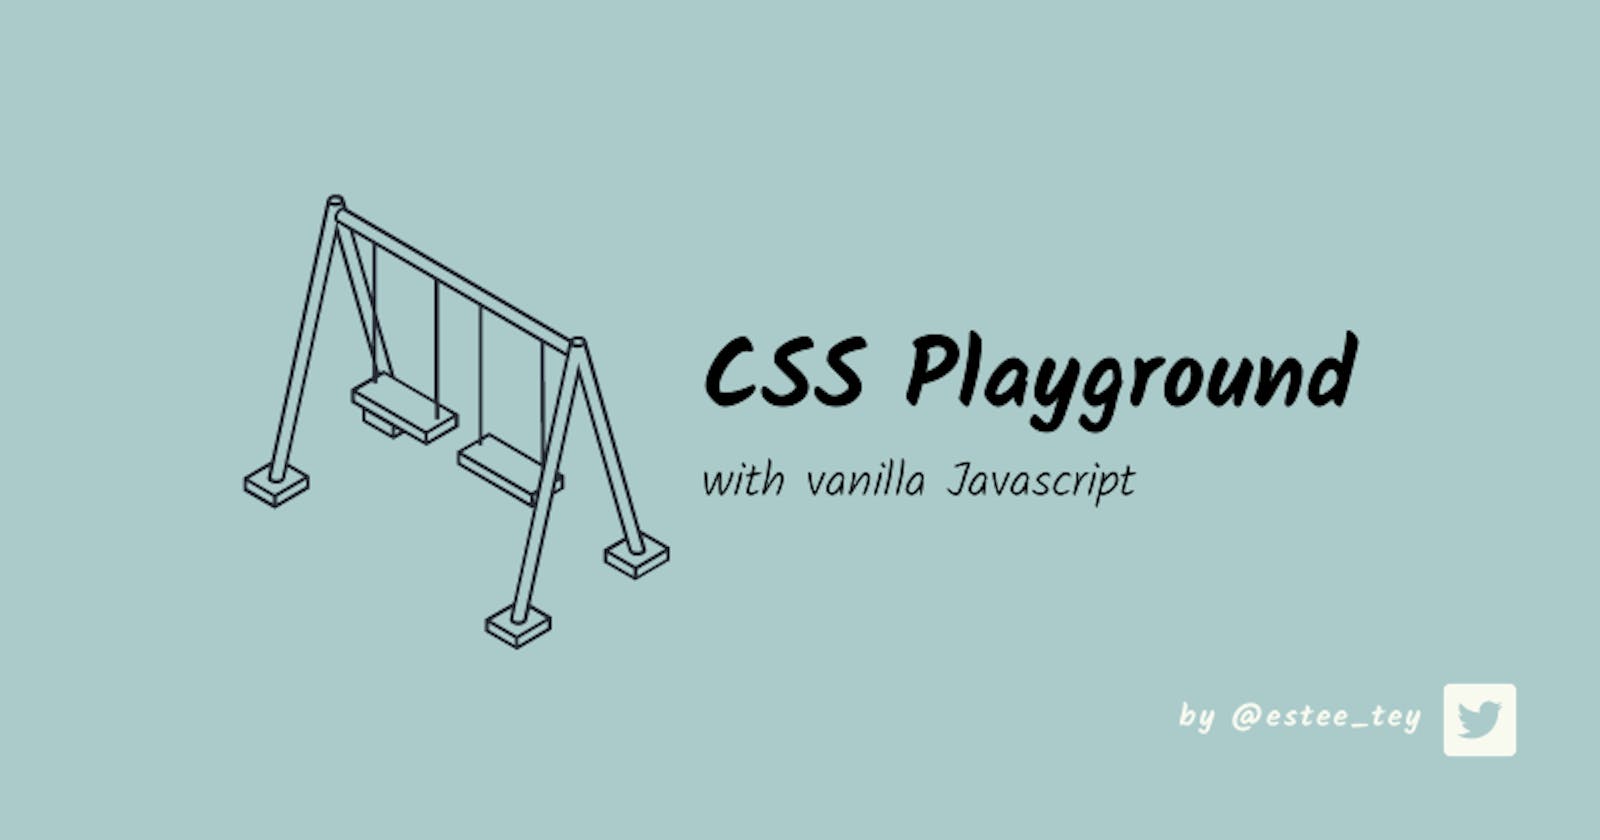 How to create a CSS Playground for styling Pseudo-elements with Vanilla JavaScript